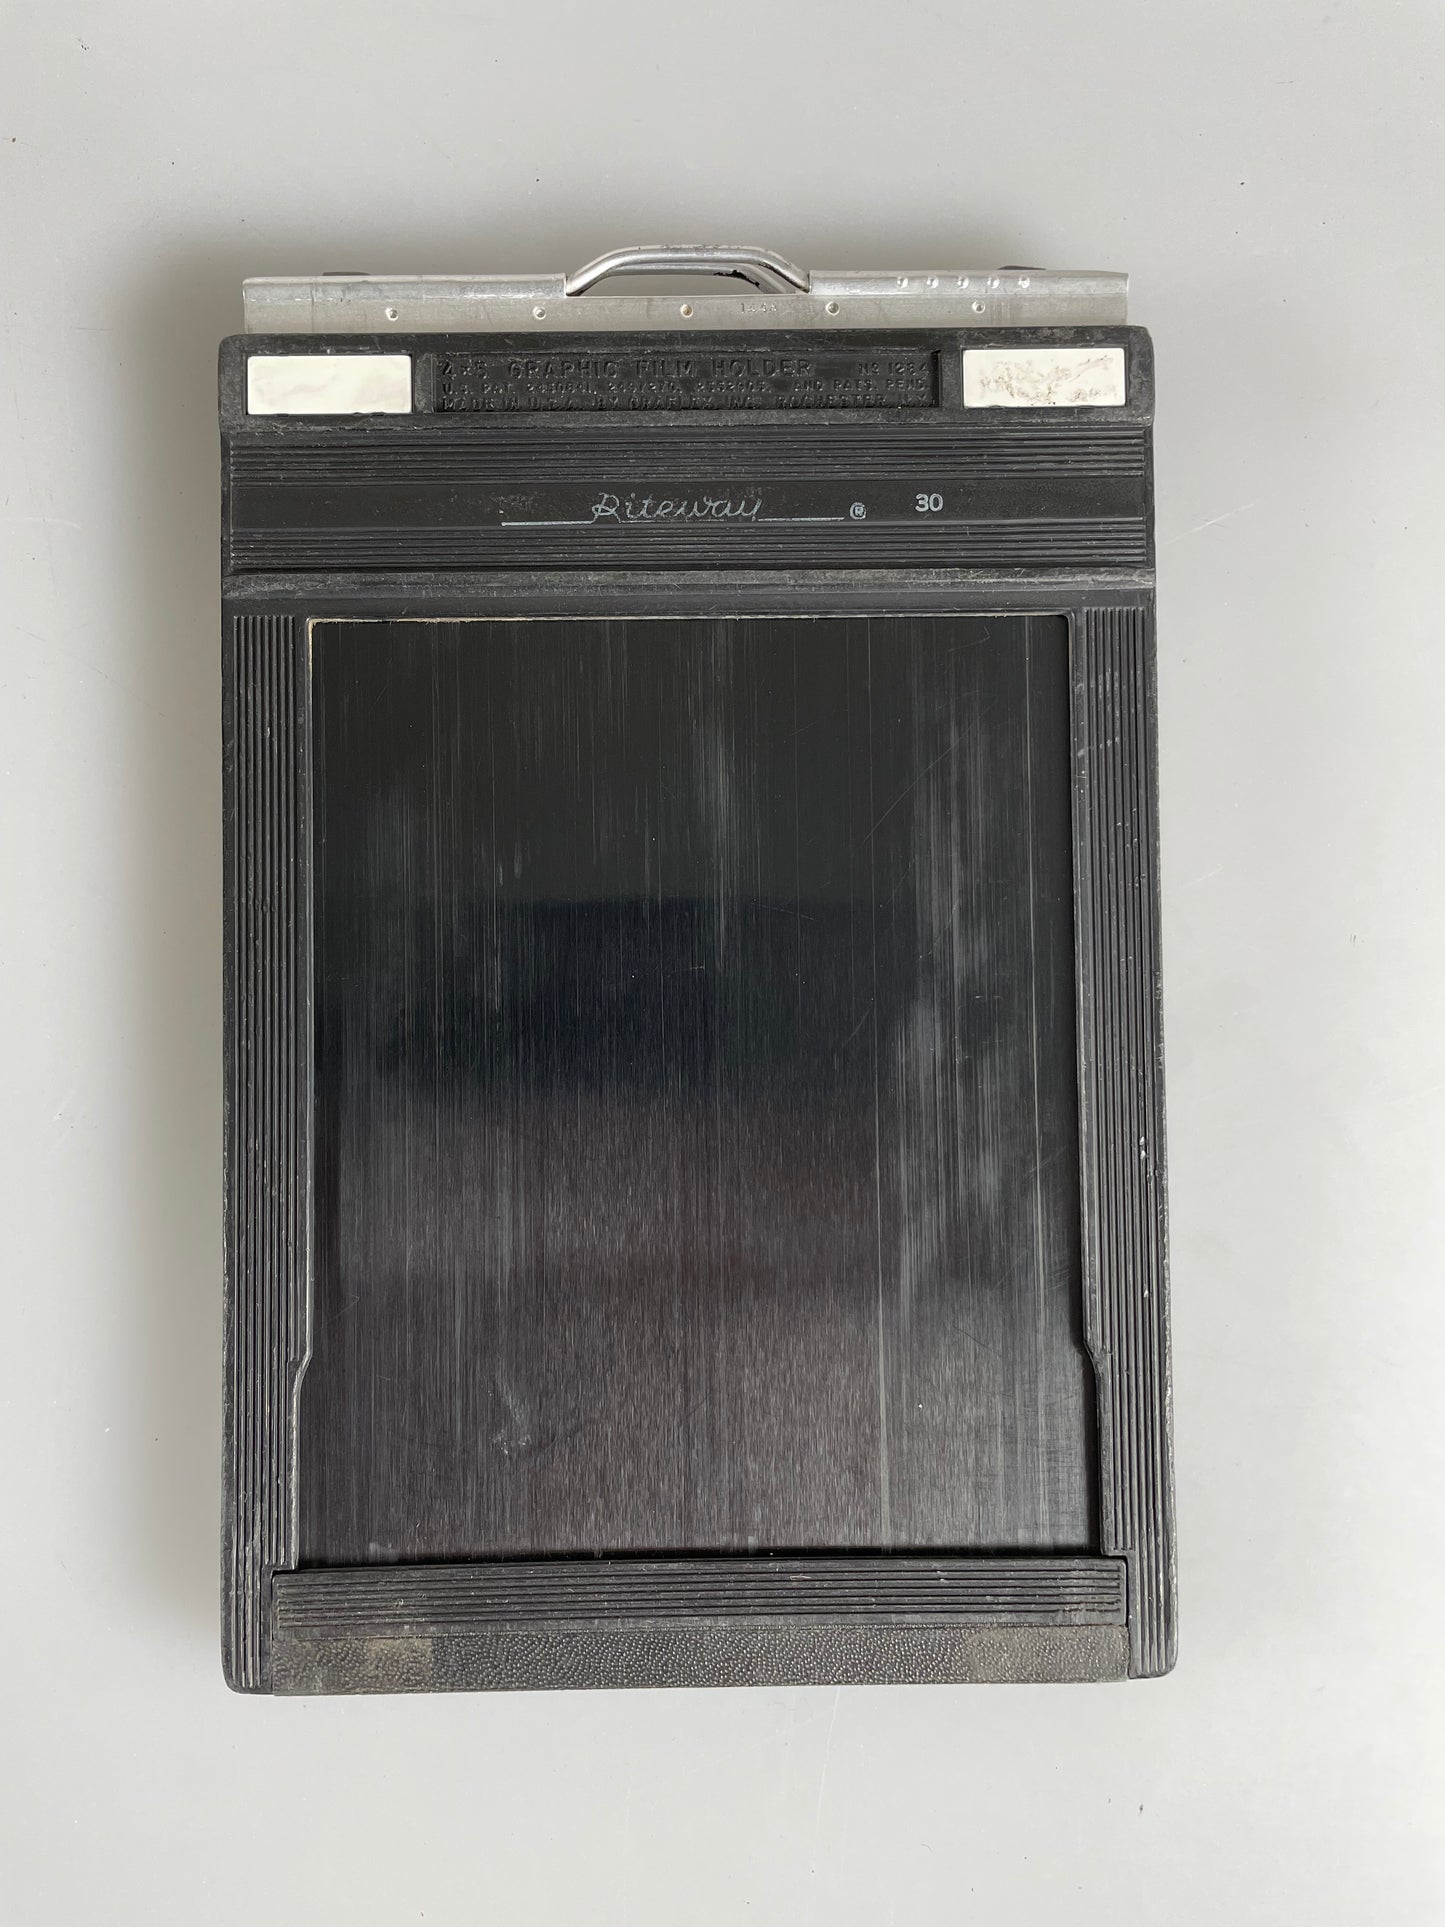 Riteway plastic 4x5 Film holder for large format cameras lot of 10